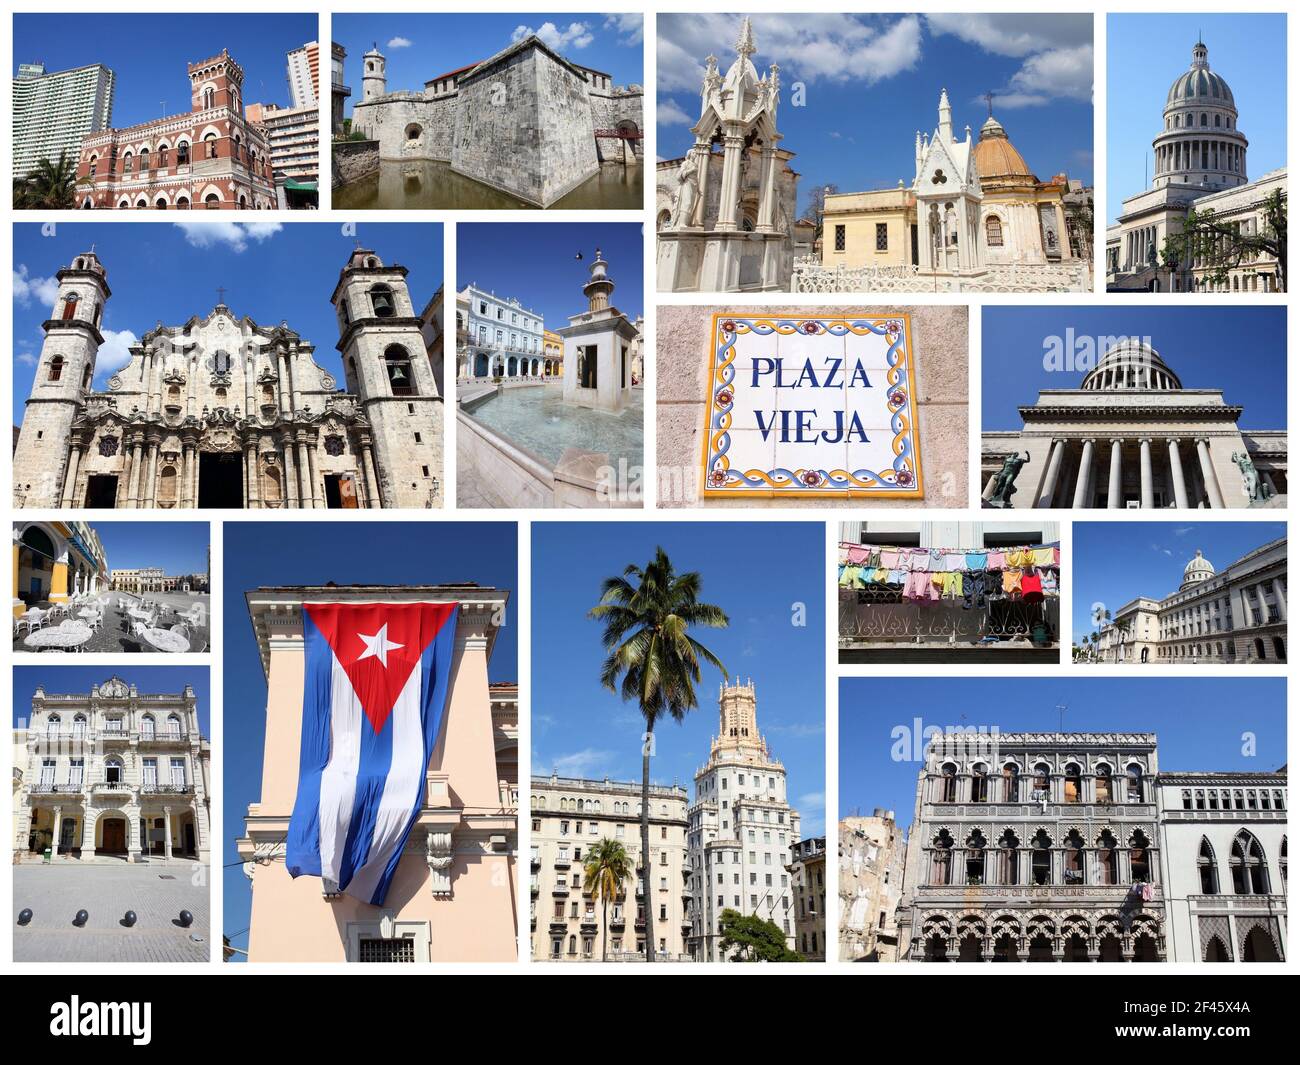 Havana, Cuba photos collage - travel memories photo collection. Images of Capitolio, the cathedral and colonial architecture. Stock Photo